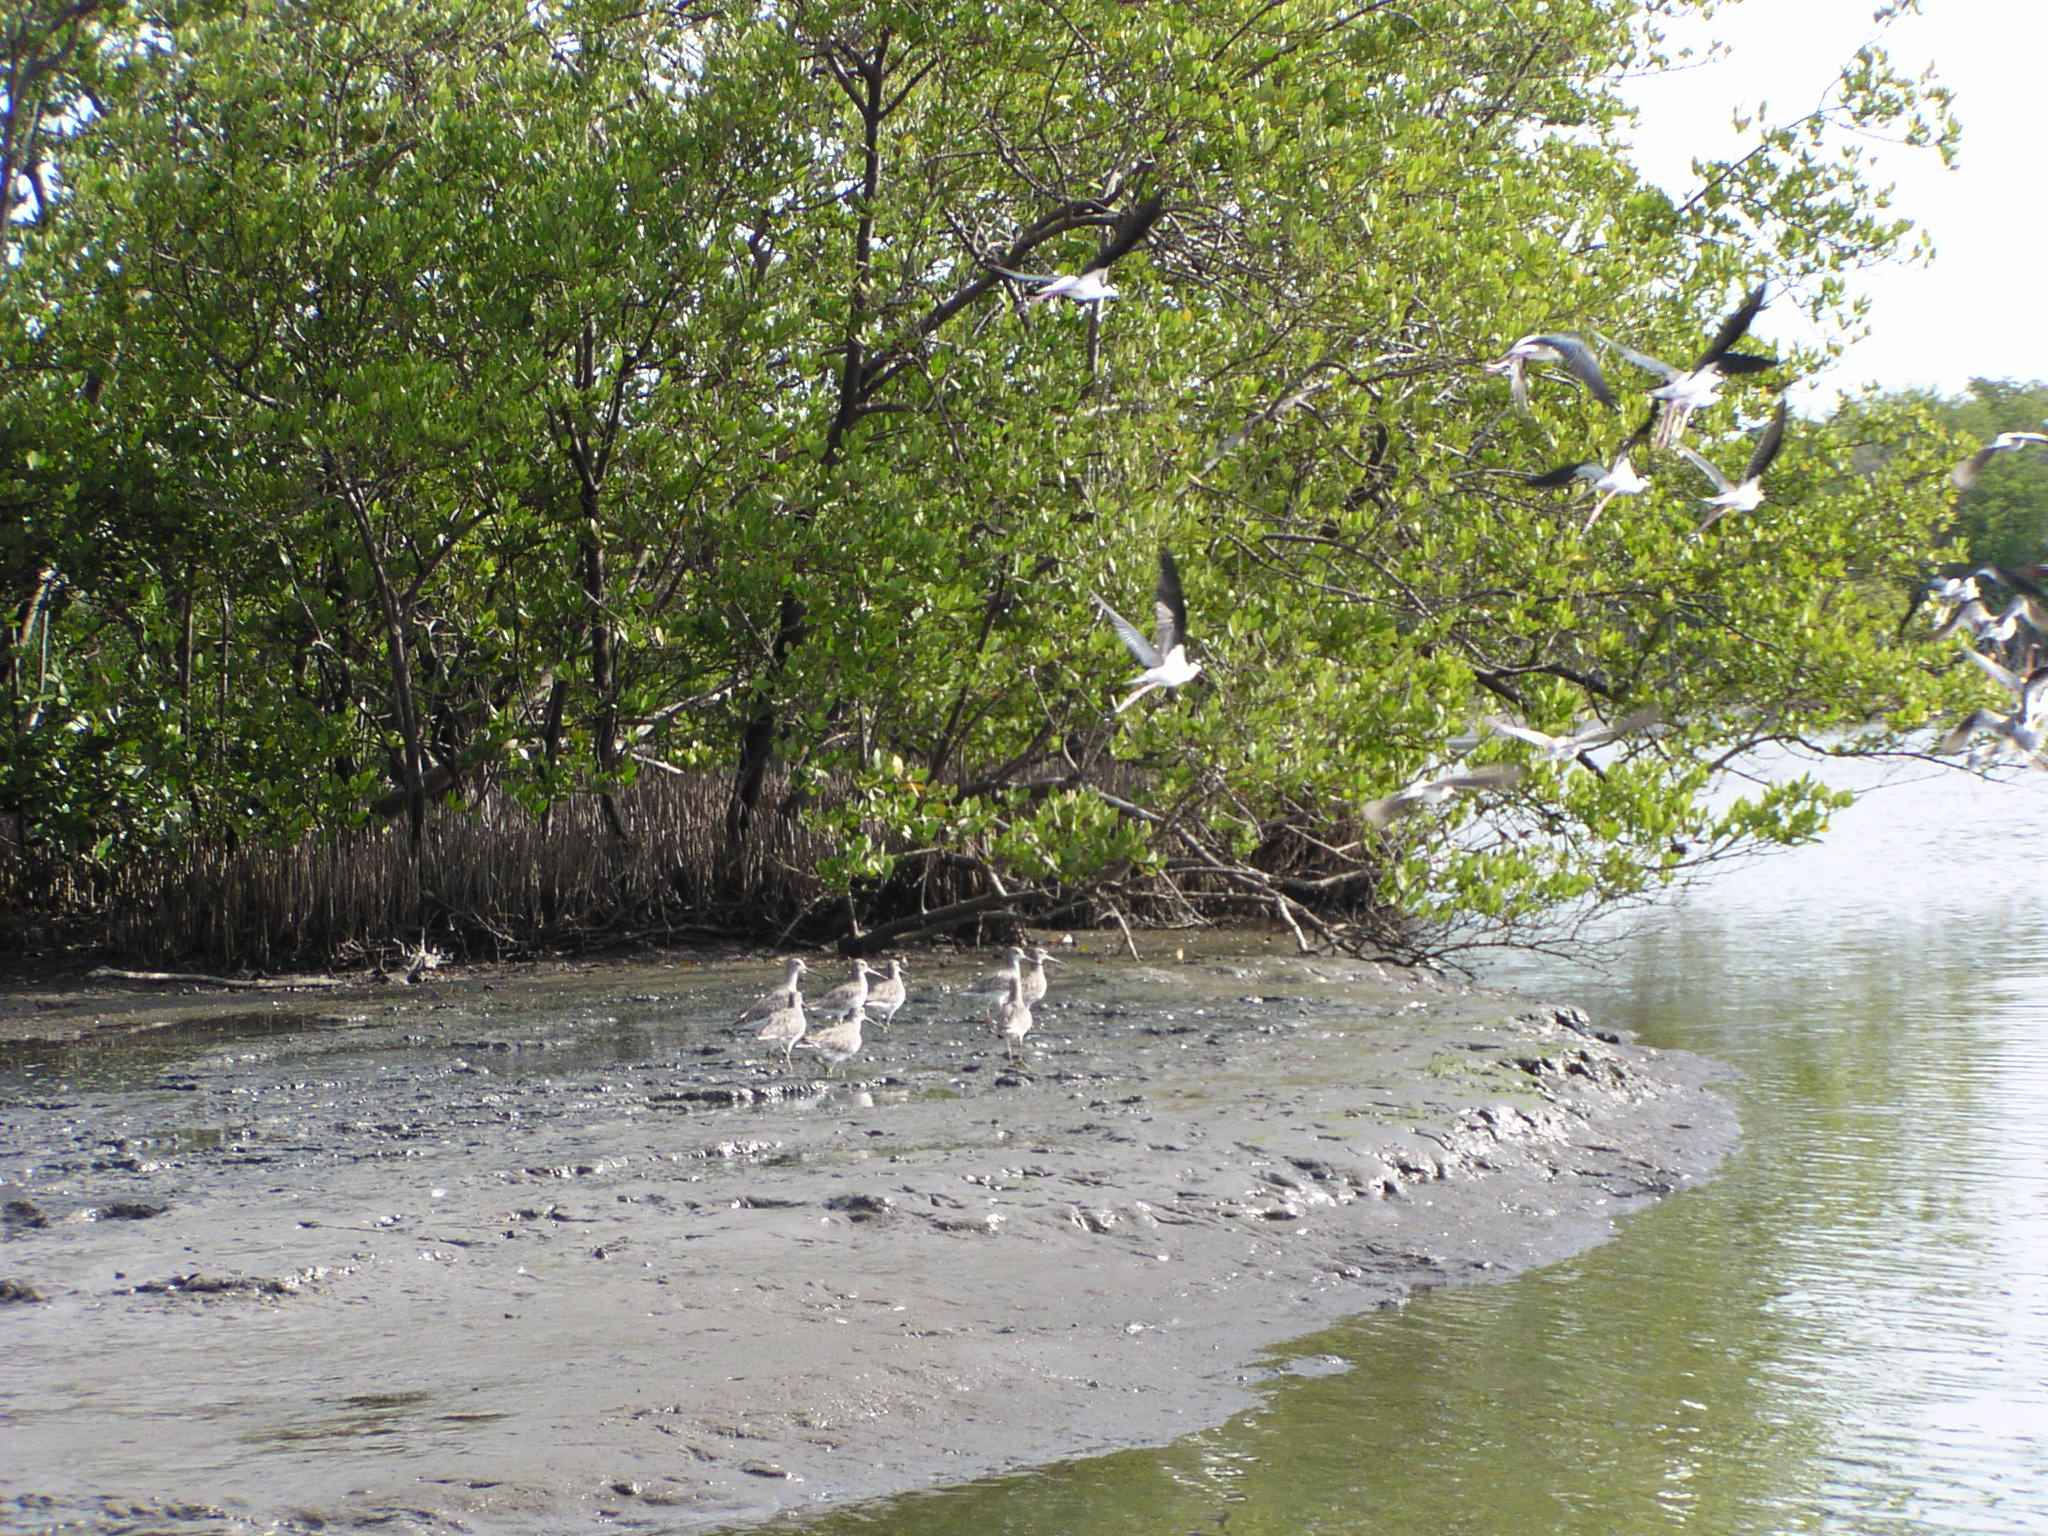 The largest extension of mangroves is located in the south of the municipality of Jobabo